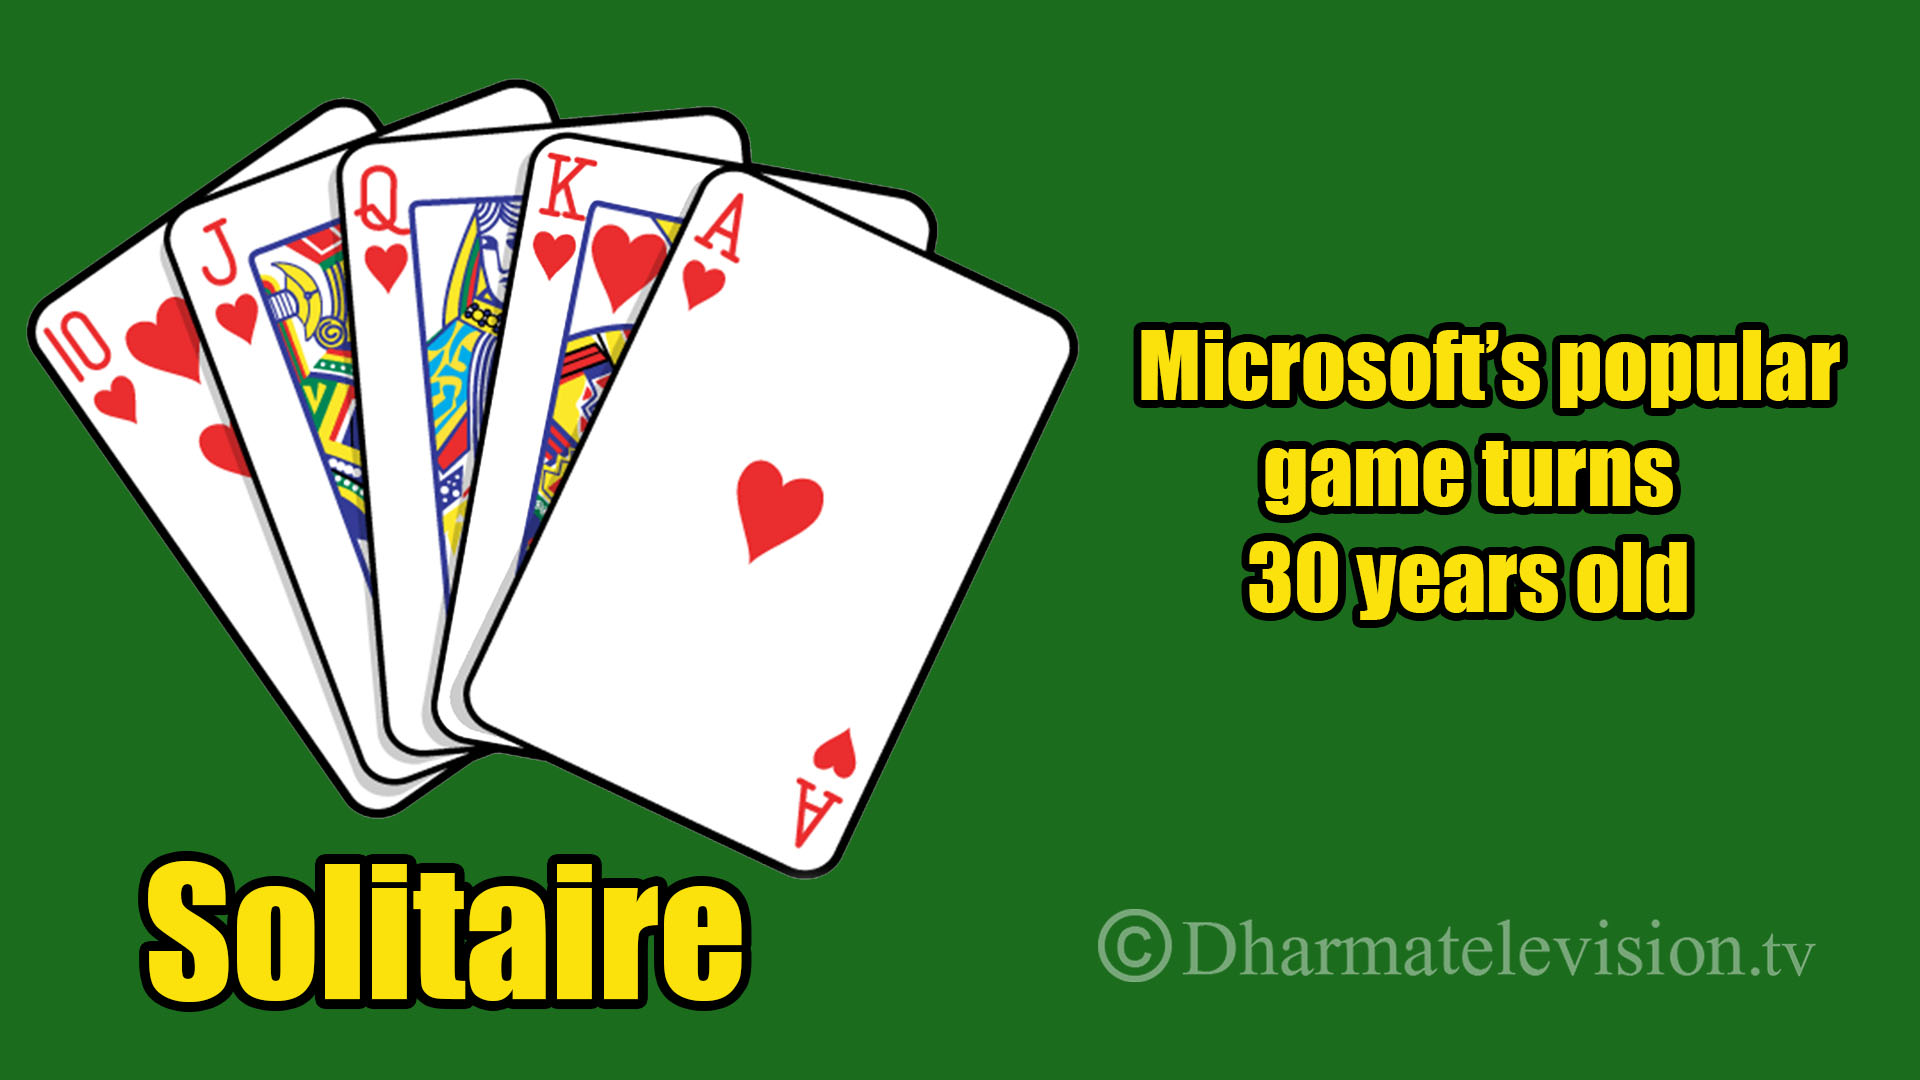 Microsoft’s Solitaire with 35 million players, turns 30